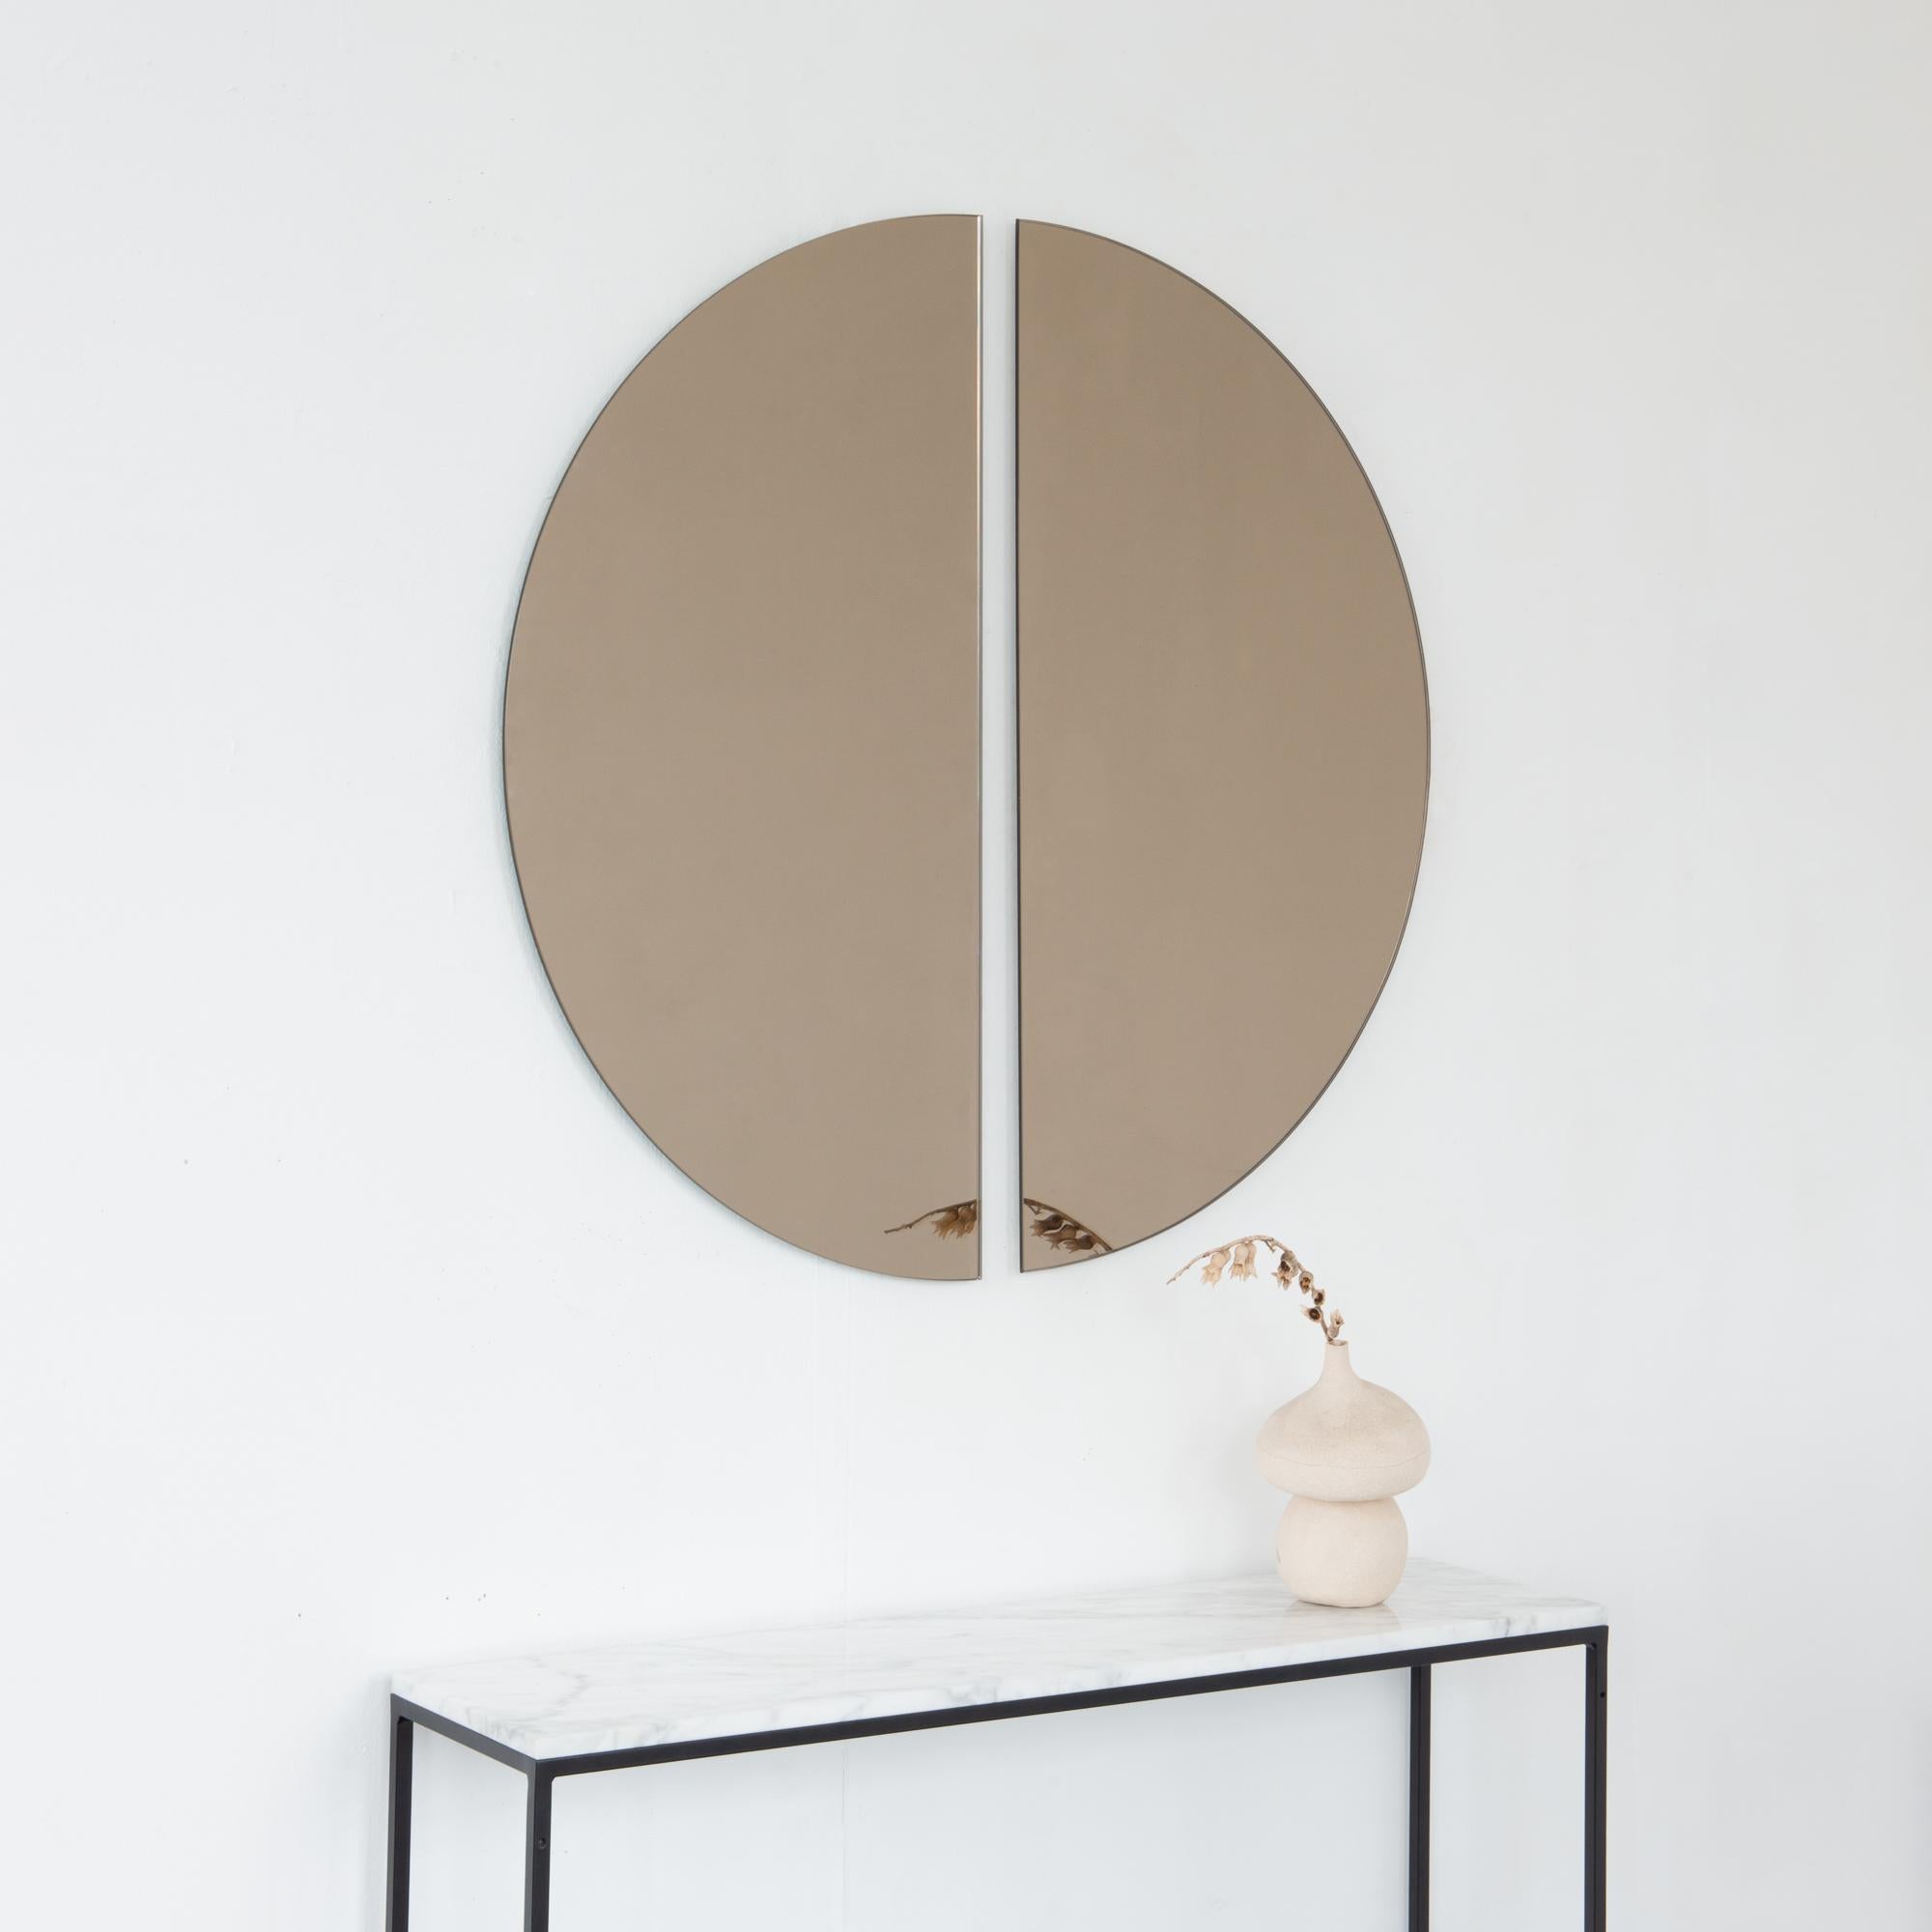 Set of two minimalist half-moon Luna™ bronze tinted frameless mirrors with a floating effect. Fitted with a quality and ingenious hanging system for a flexible installation in 4 different directions. Designed and made in London, UK. 

The backing